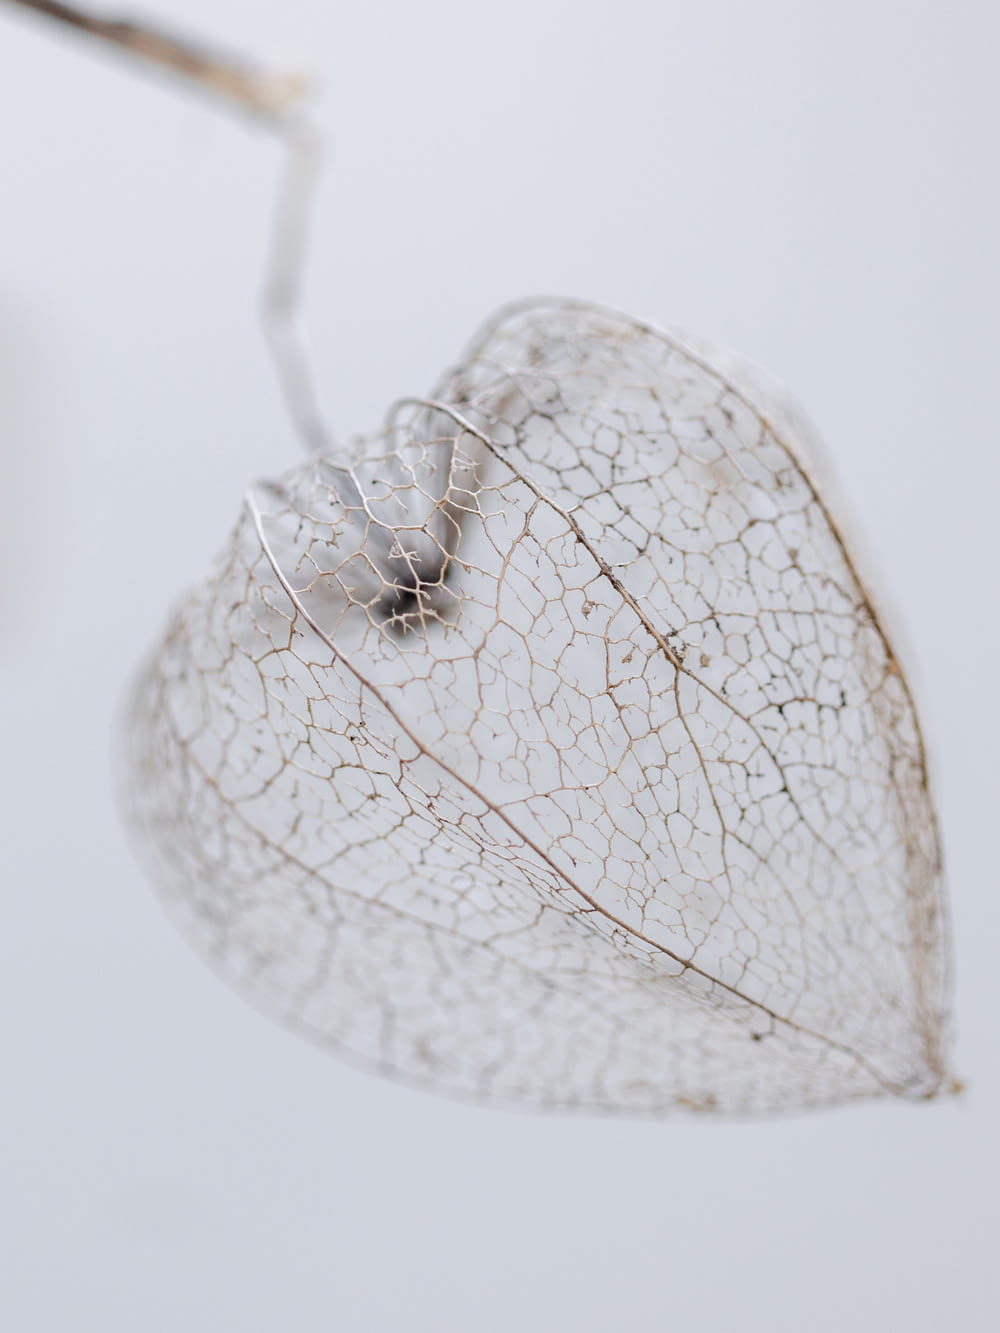 a close up of a leaf on a white background